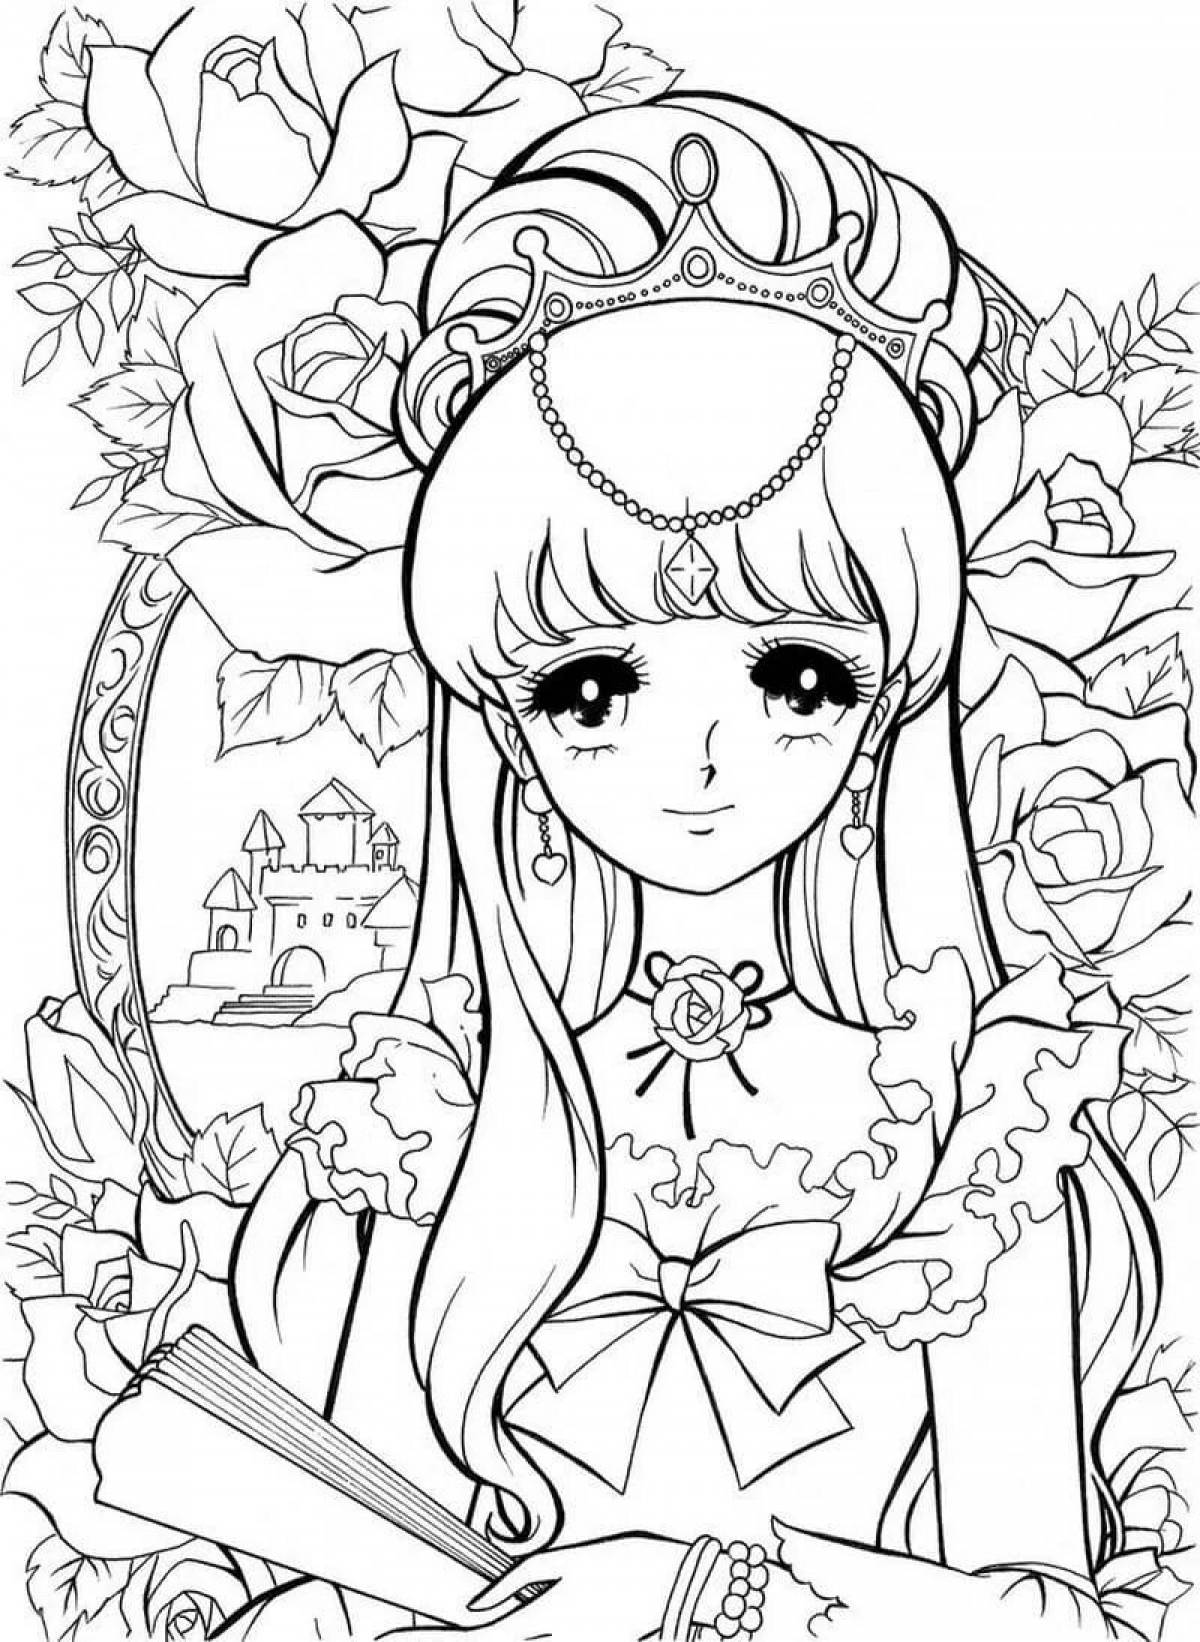 Amazing coloring page 11 for girls